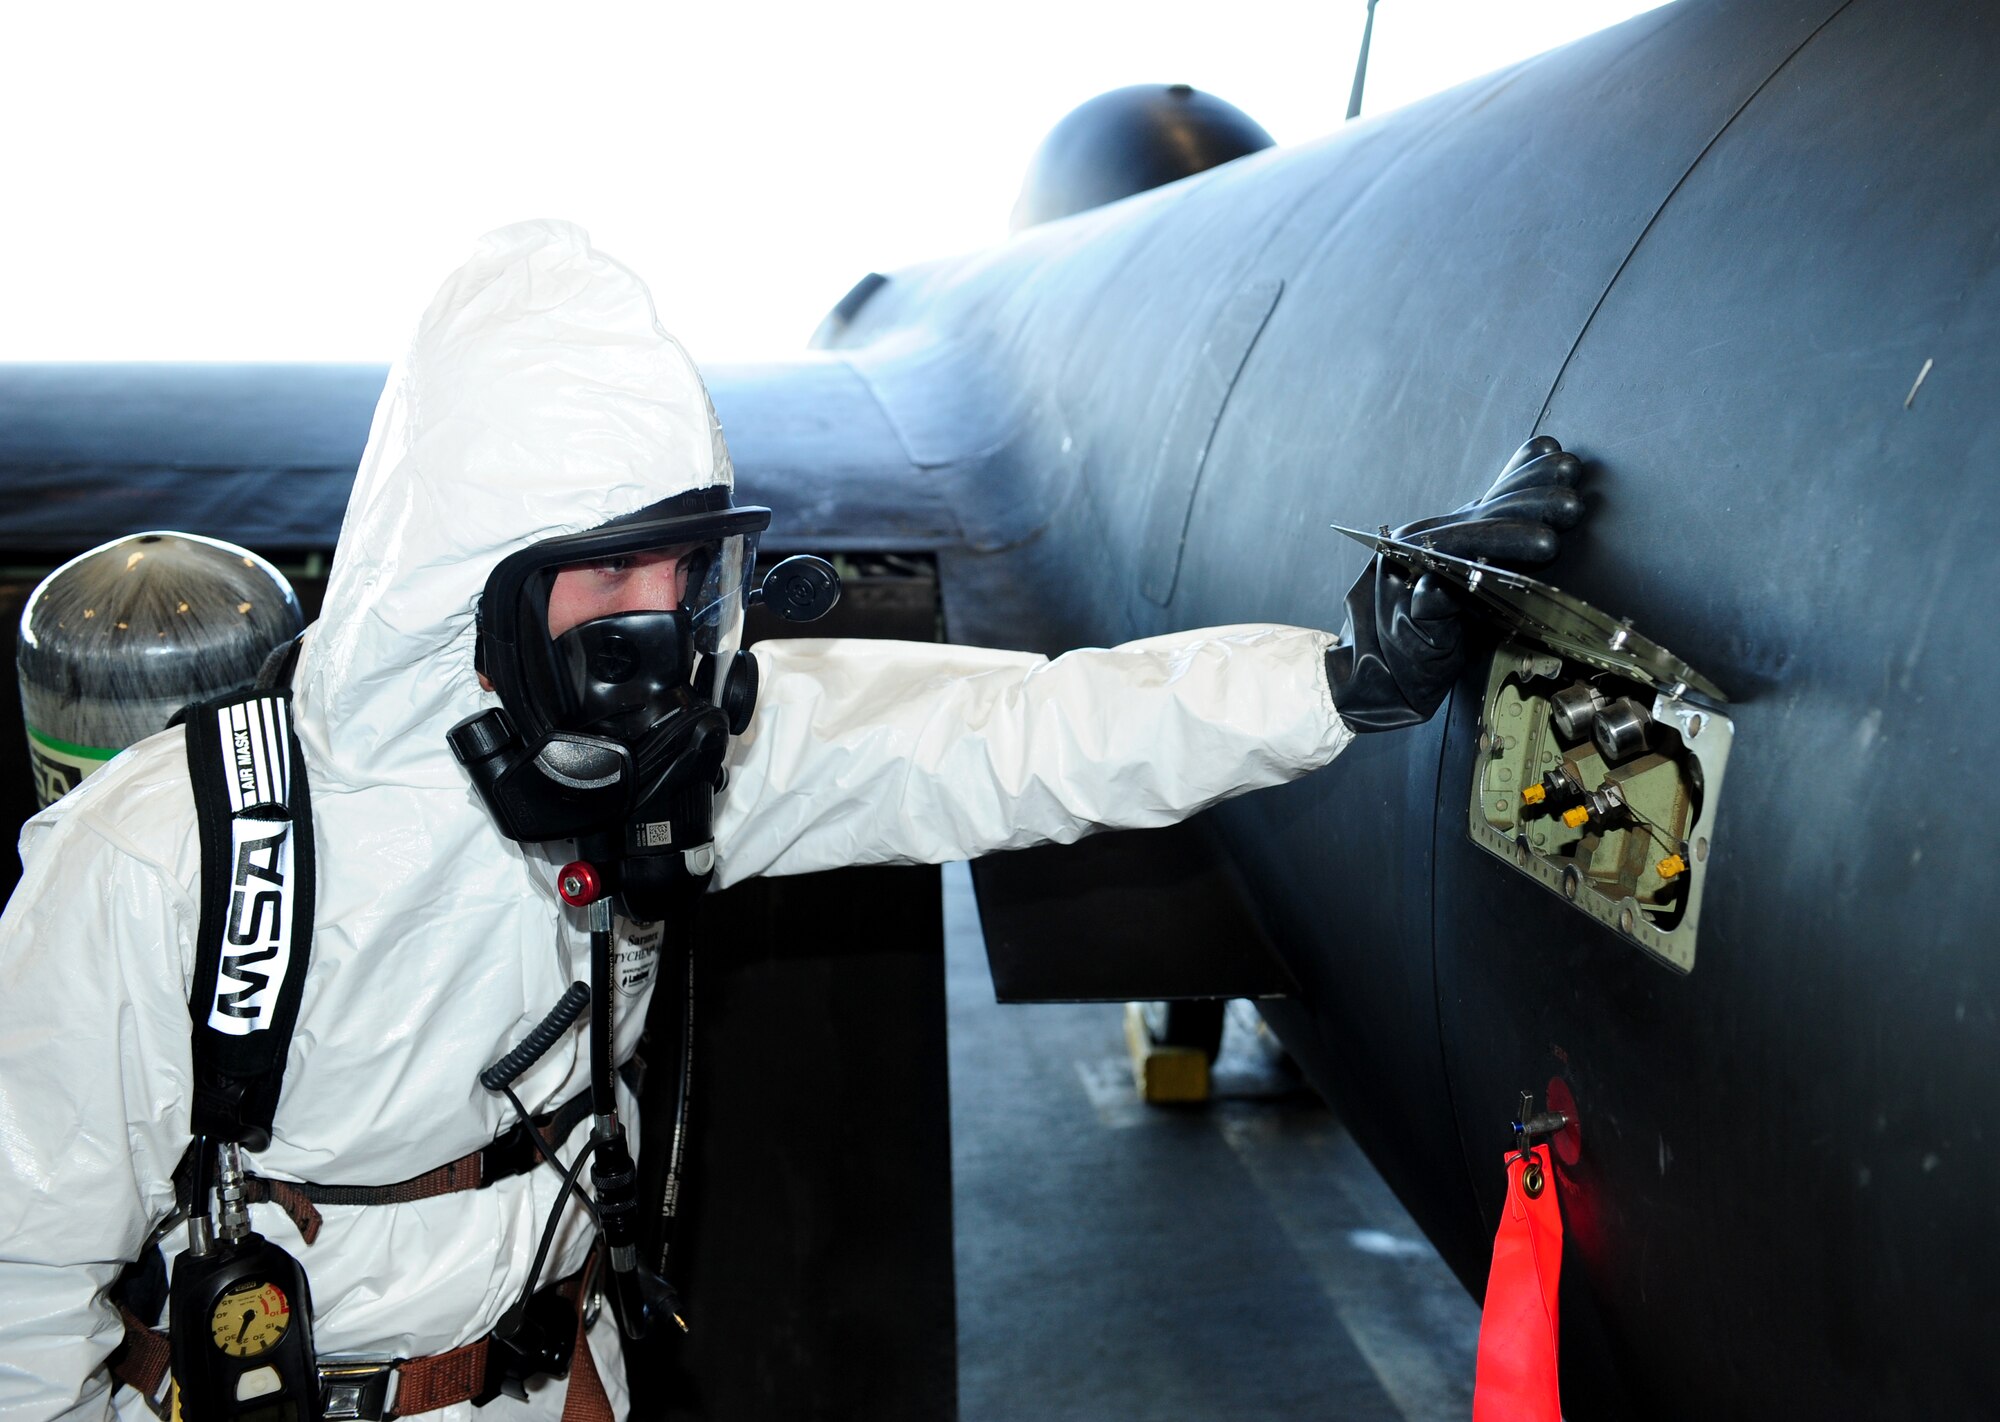 Senior Airman James Everson, 9th Maintenance Squadron aircraft fuels systems technician, inspects a hydrazine indicator on a U-2 Dragon Lady during a hydrazine response exercise Oct. 11, 2013, at Beale Air Force Base, Calif.  Hydrazine enables emergency restarts of the aircraft. (U.S. Air Force photo by Airman 1st Class Bobby Cummings/Released)